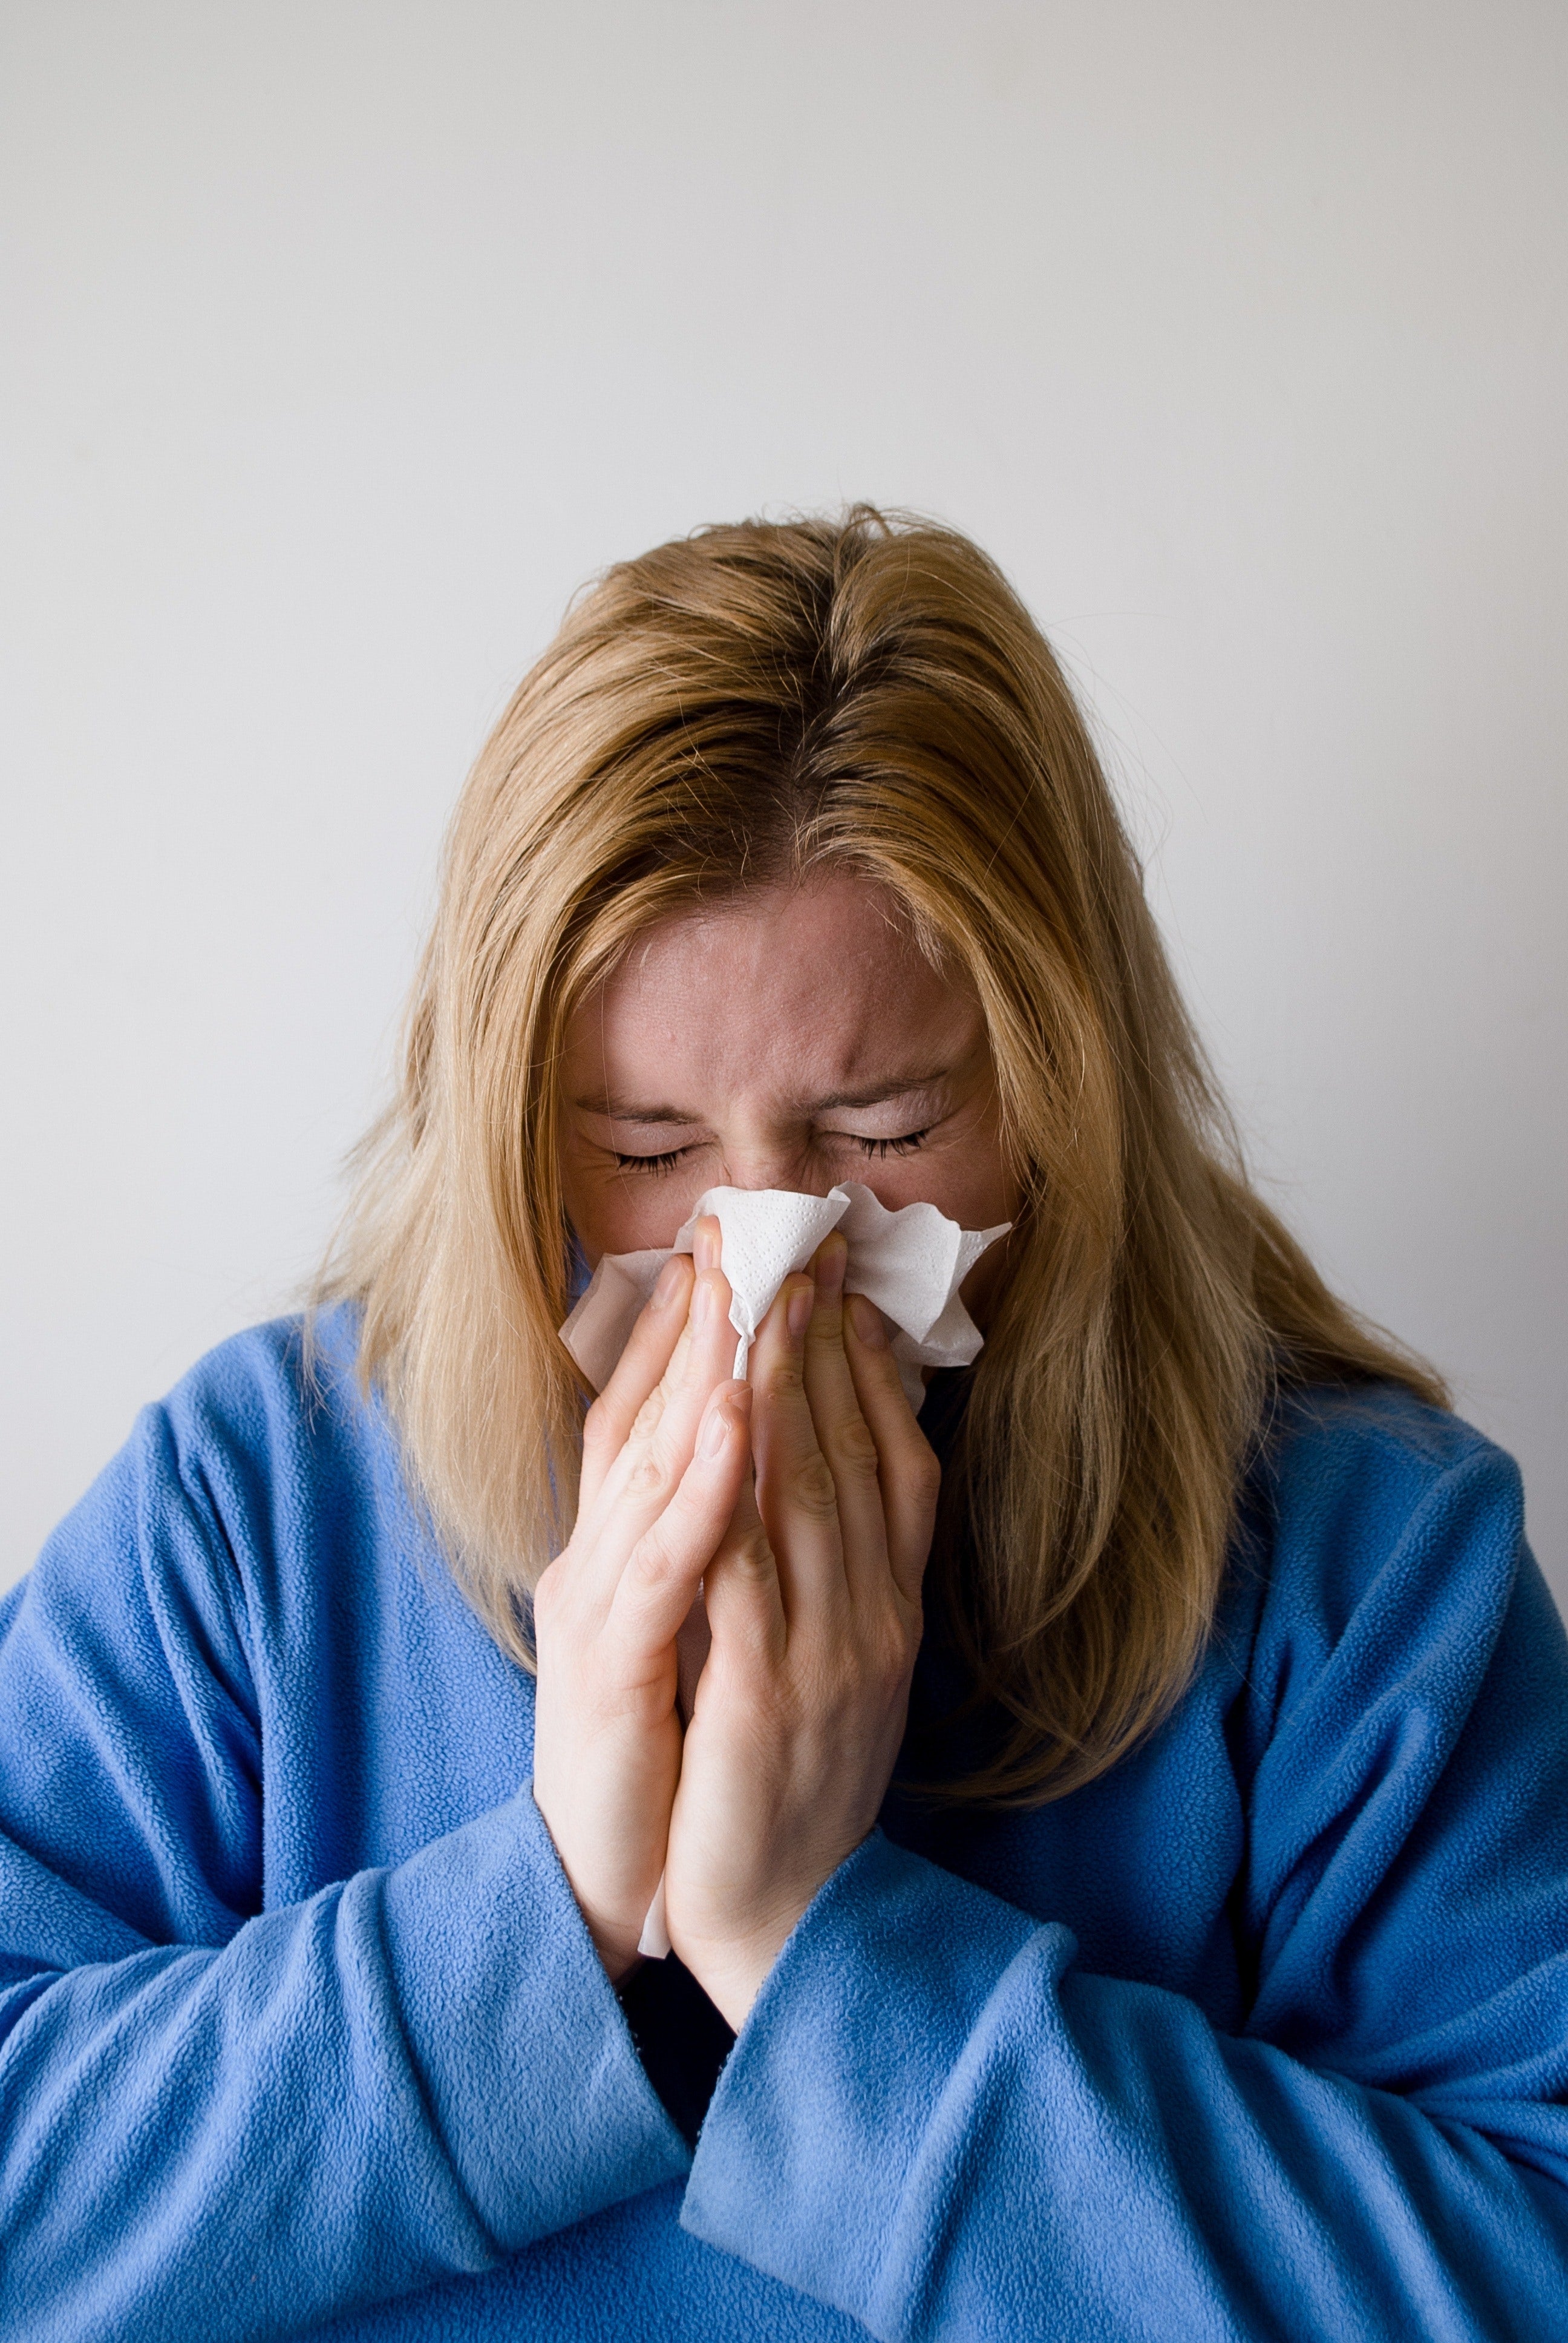 Tired of Dust Allergy? Let’s Find You a Solution